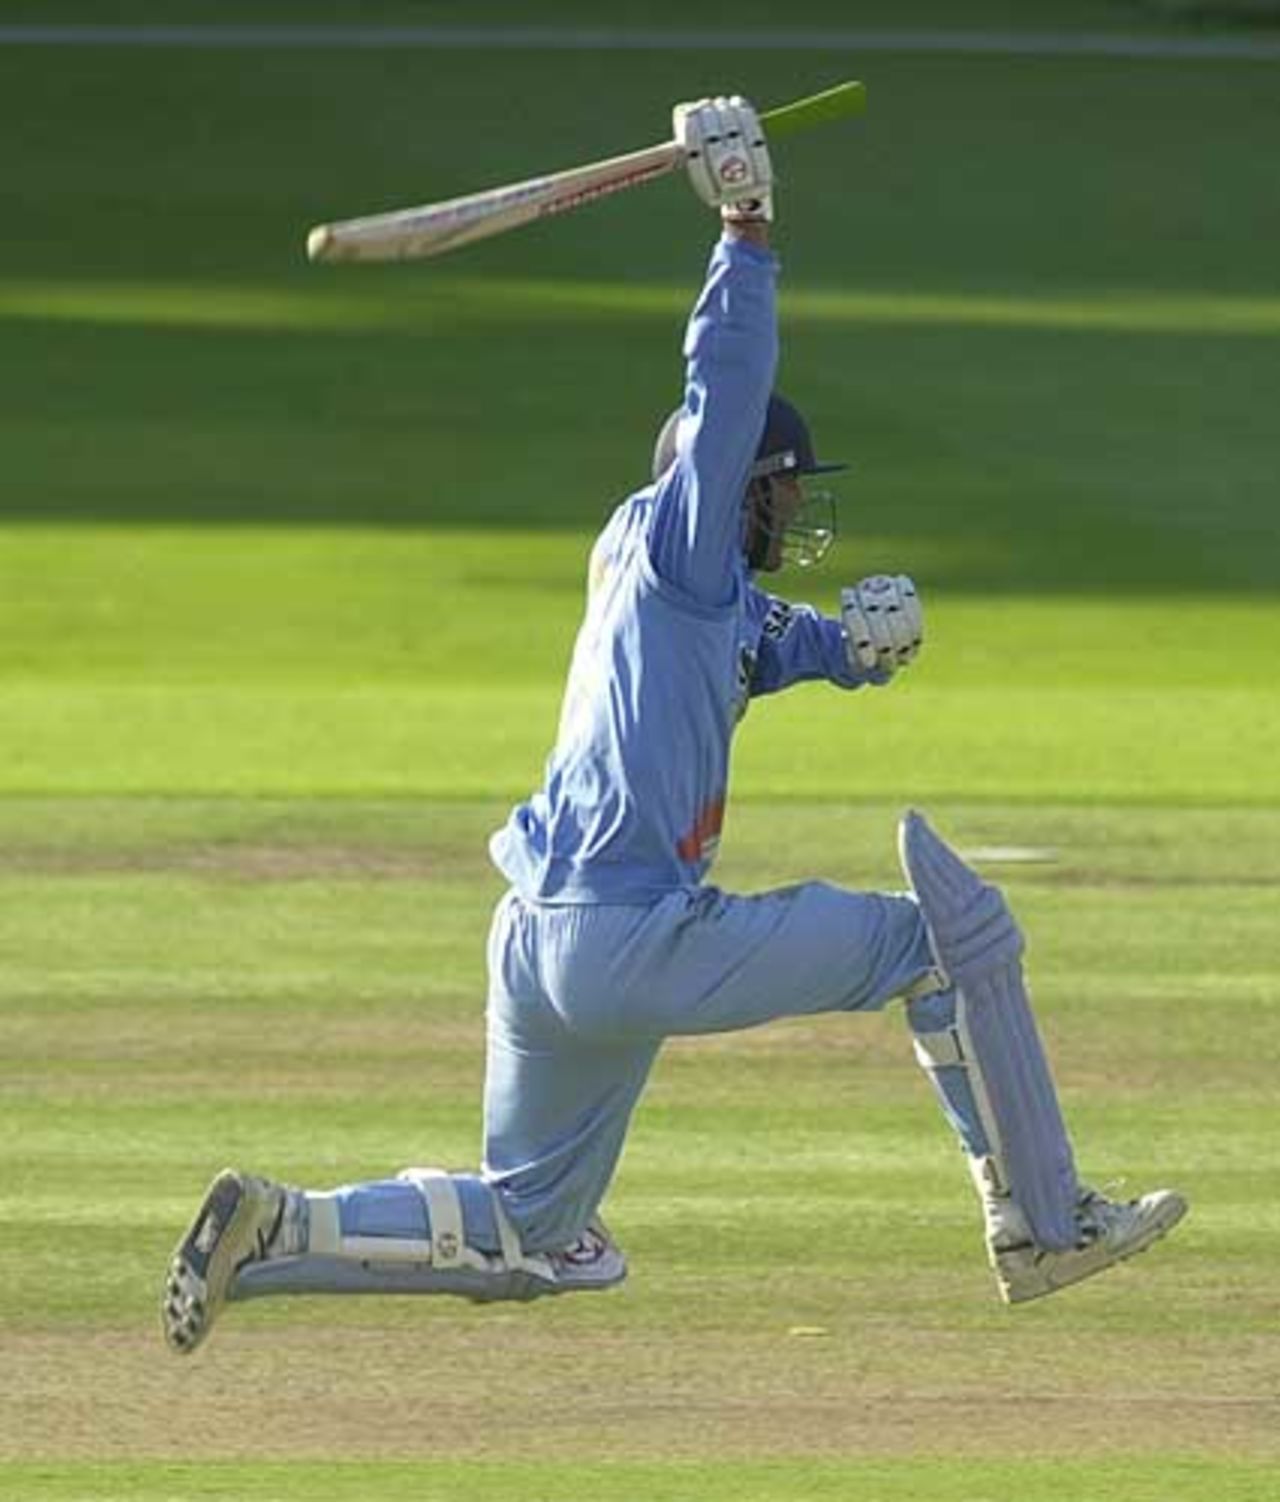 Mr Kaif doing his rounds at the end of the match, NatWest Series Final at Lord's, 13th Jul 2002